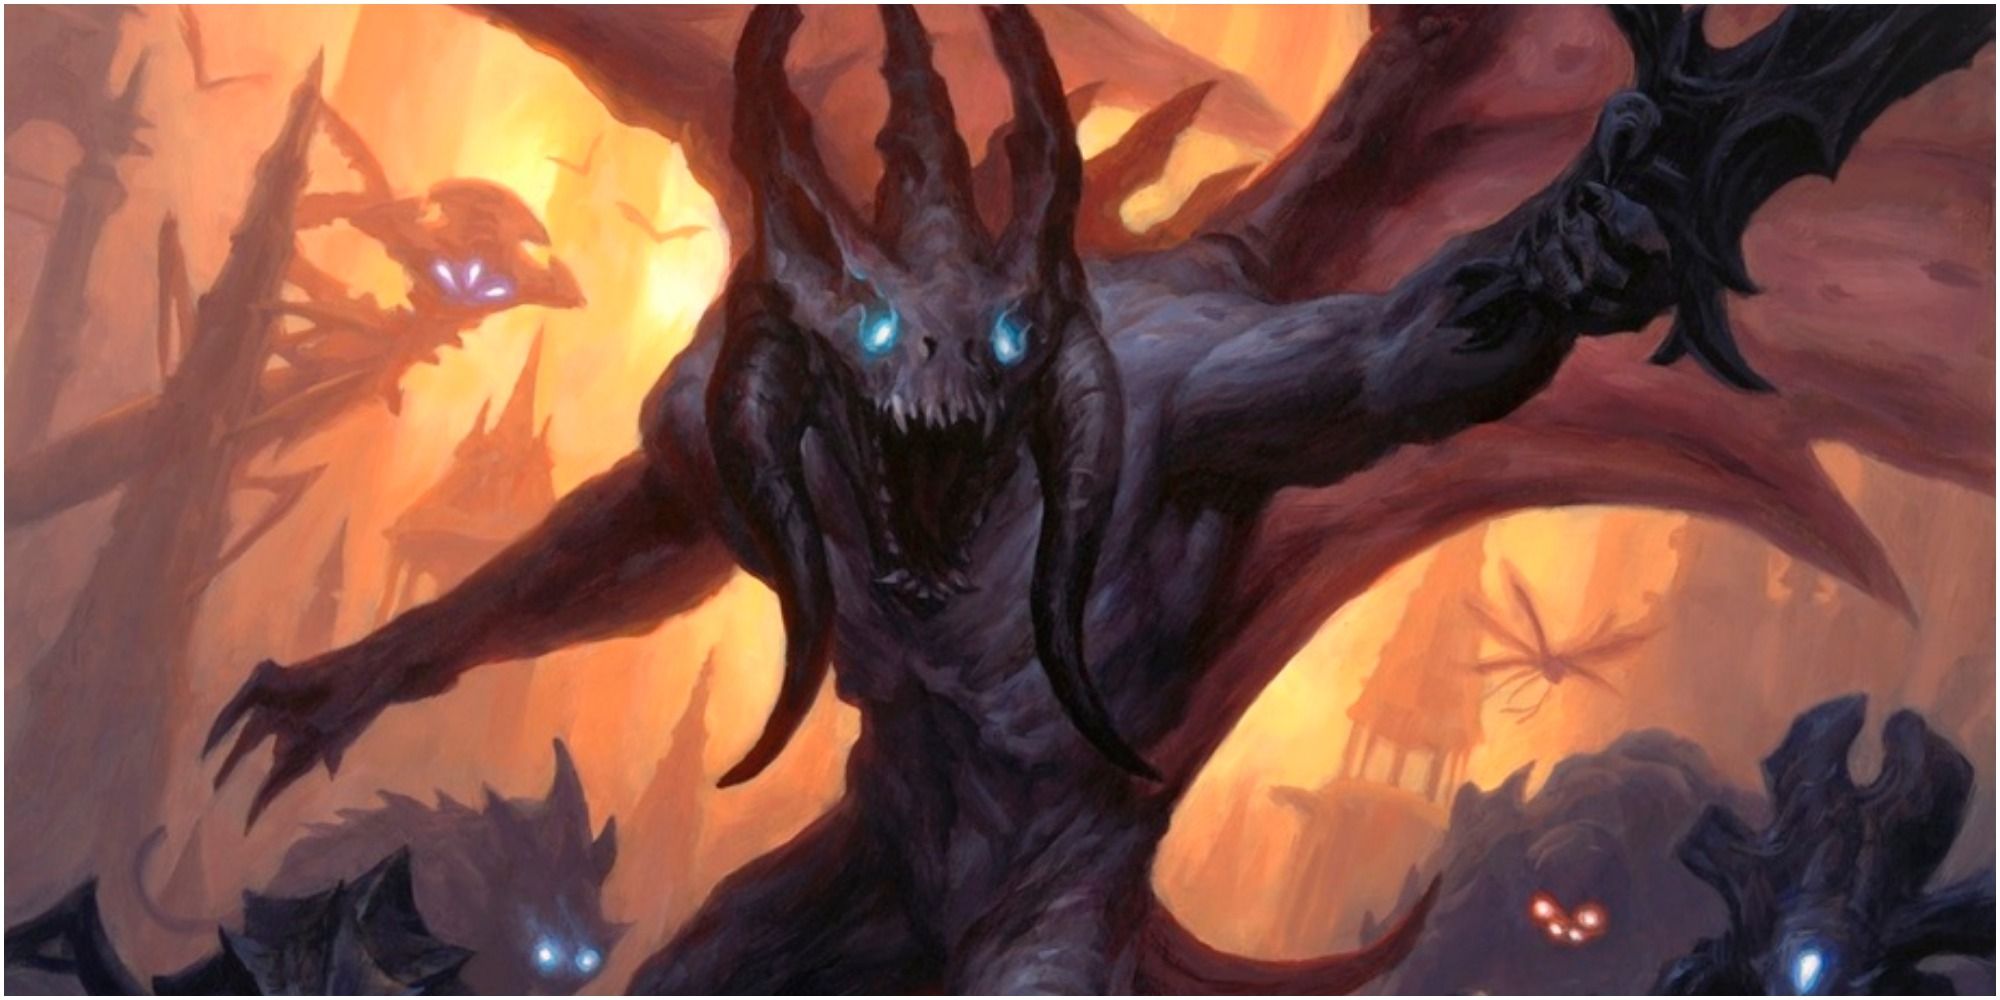 Magic The Gathering Lord of the Void card art